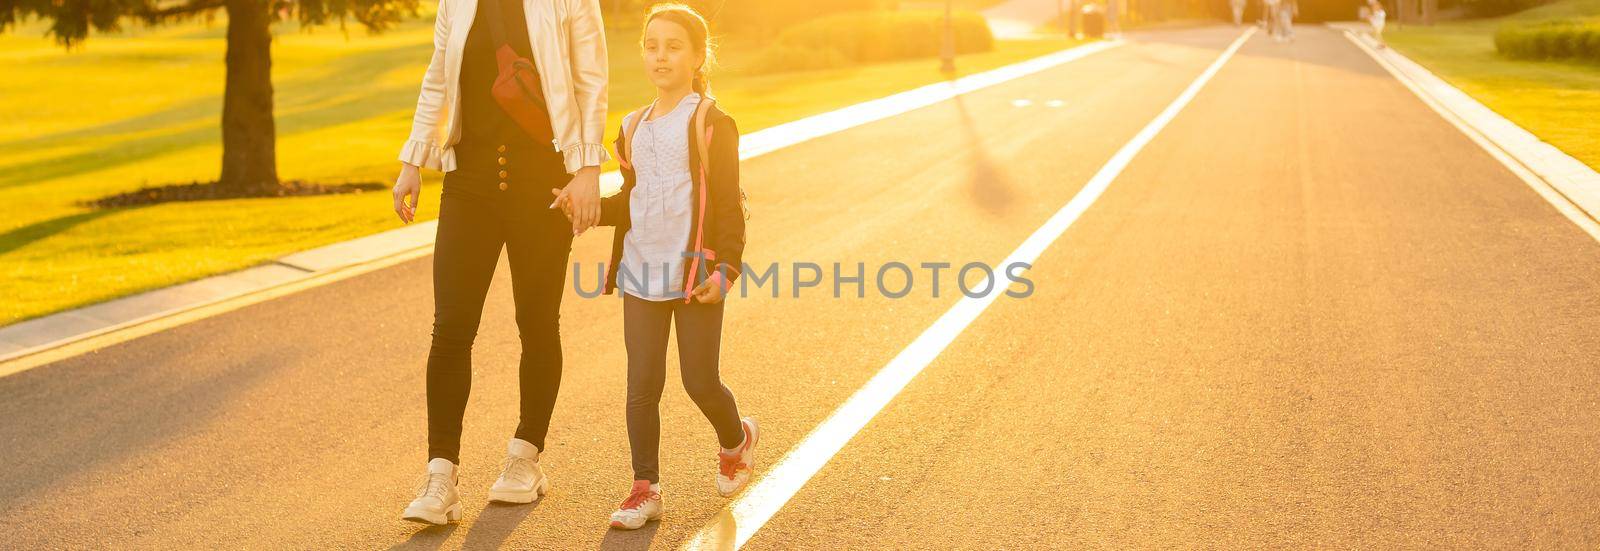 mother accompanies the child to school. mom supports and motivates the student. the little girl does not want to leave her mother. fears primary school. communication problems. attachment to parents.